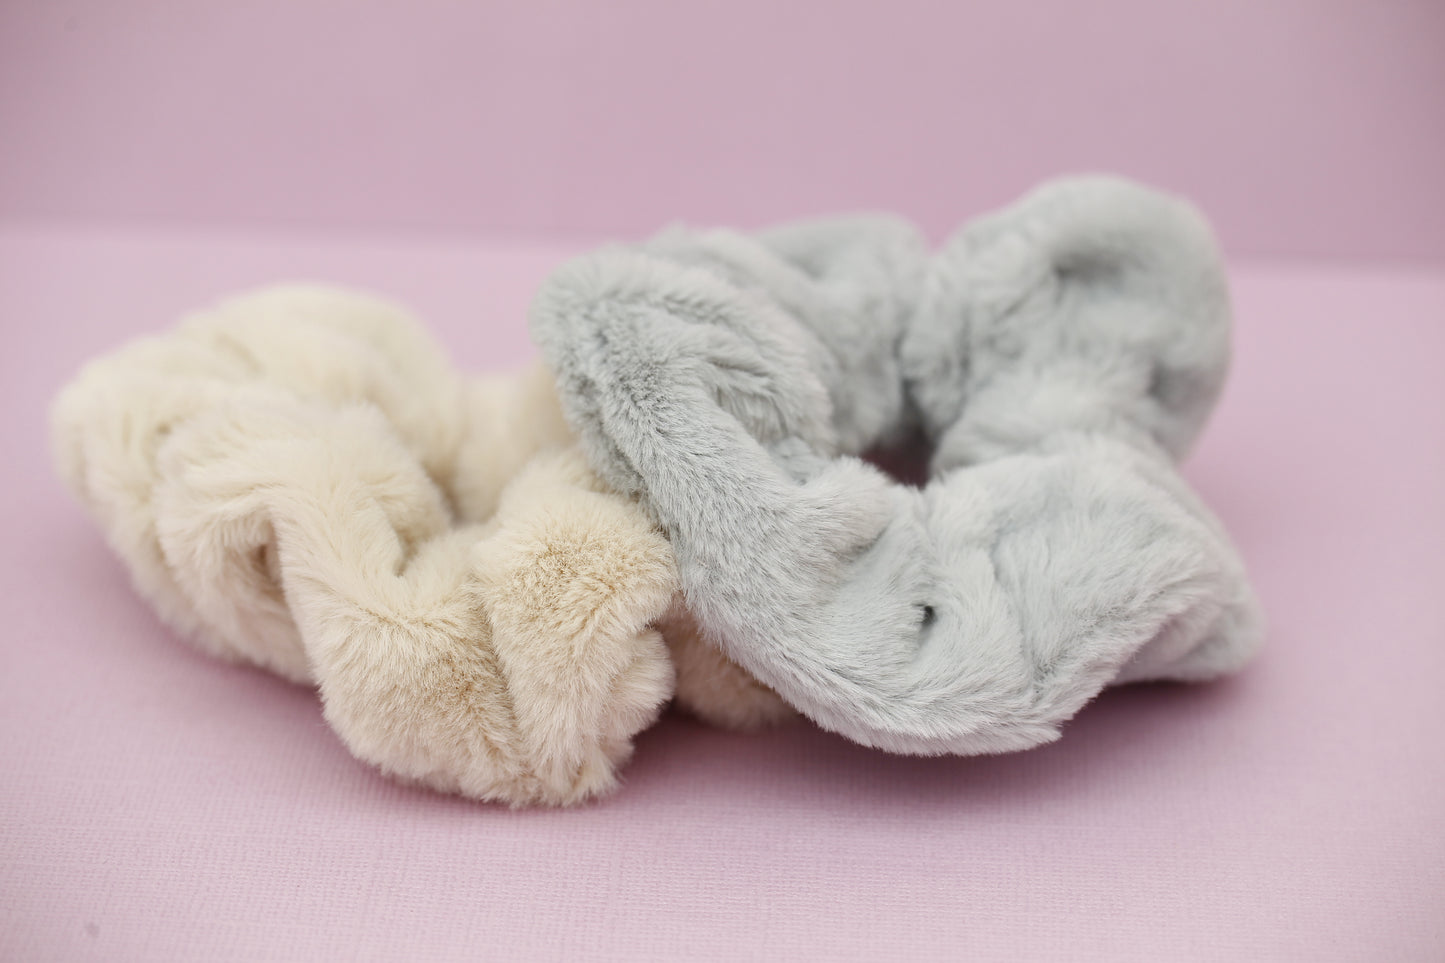 The Softies - Scrunchie 2 Pack.